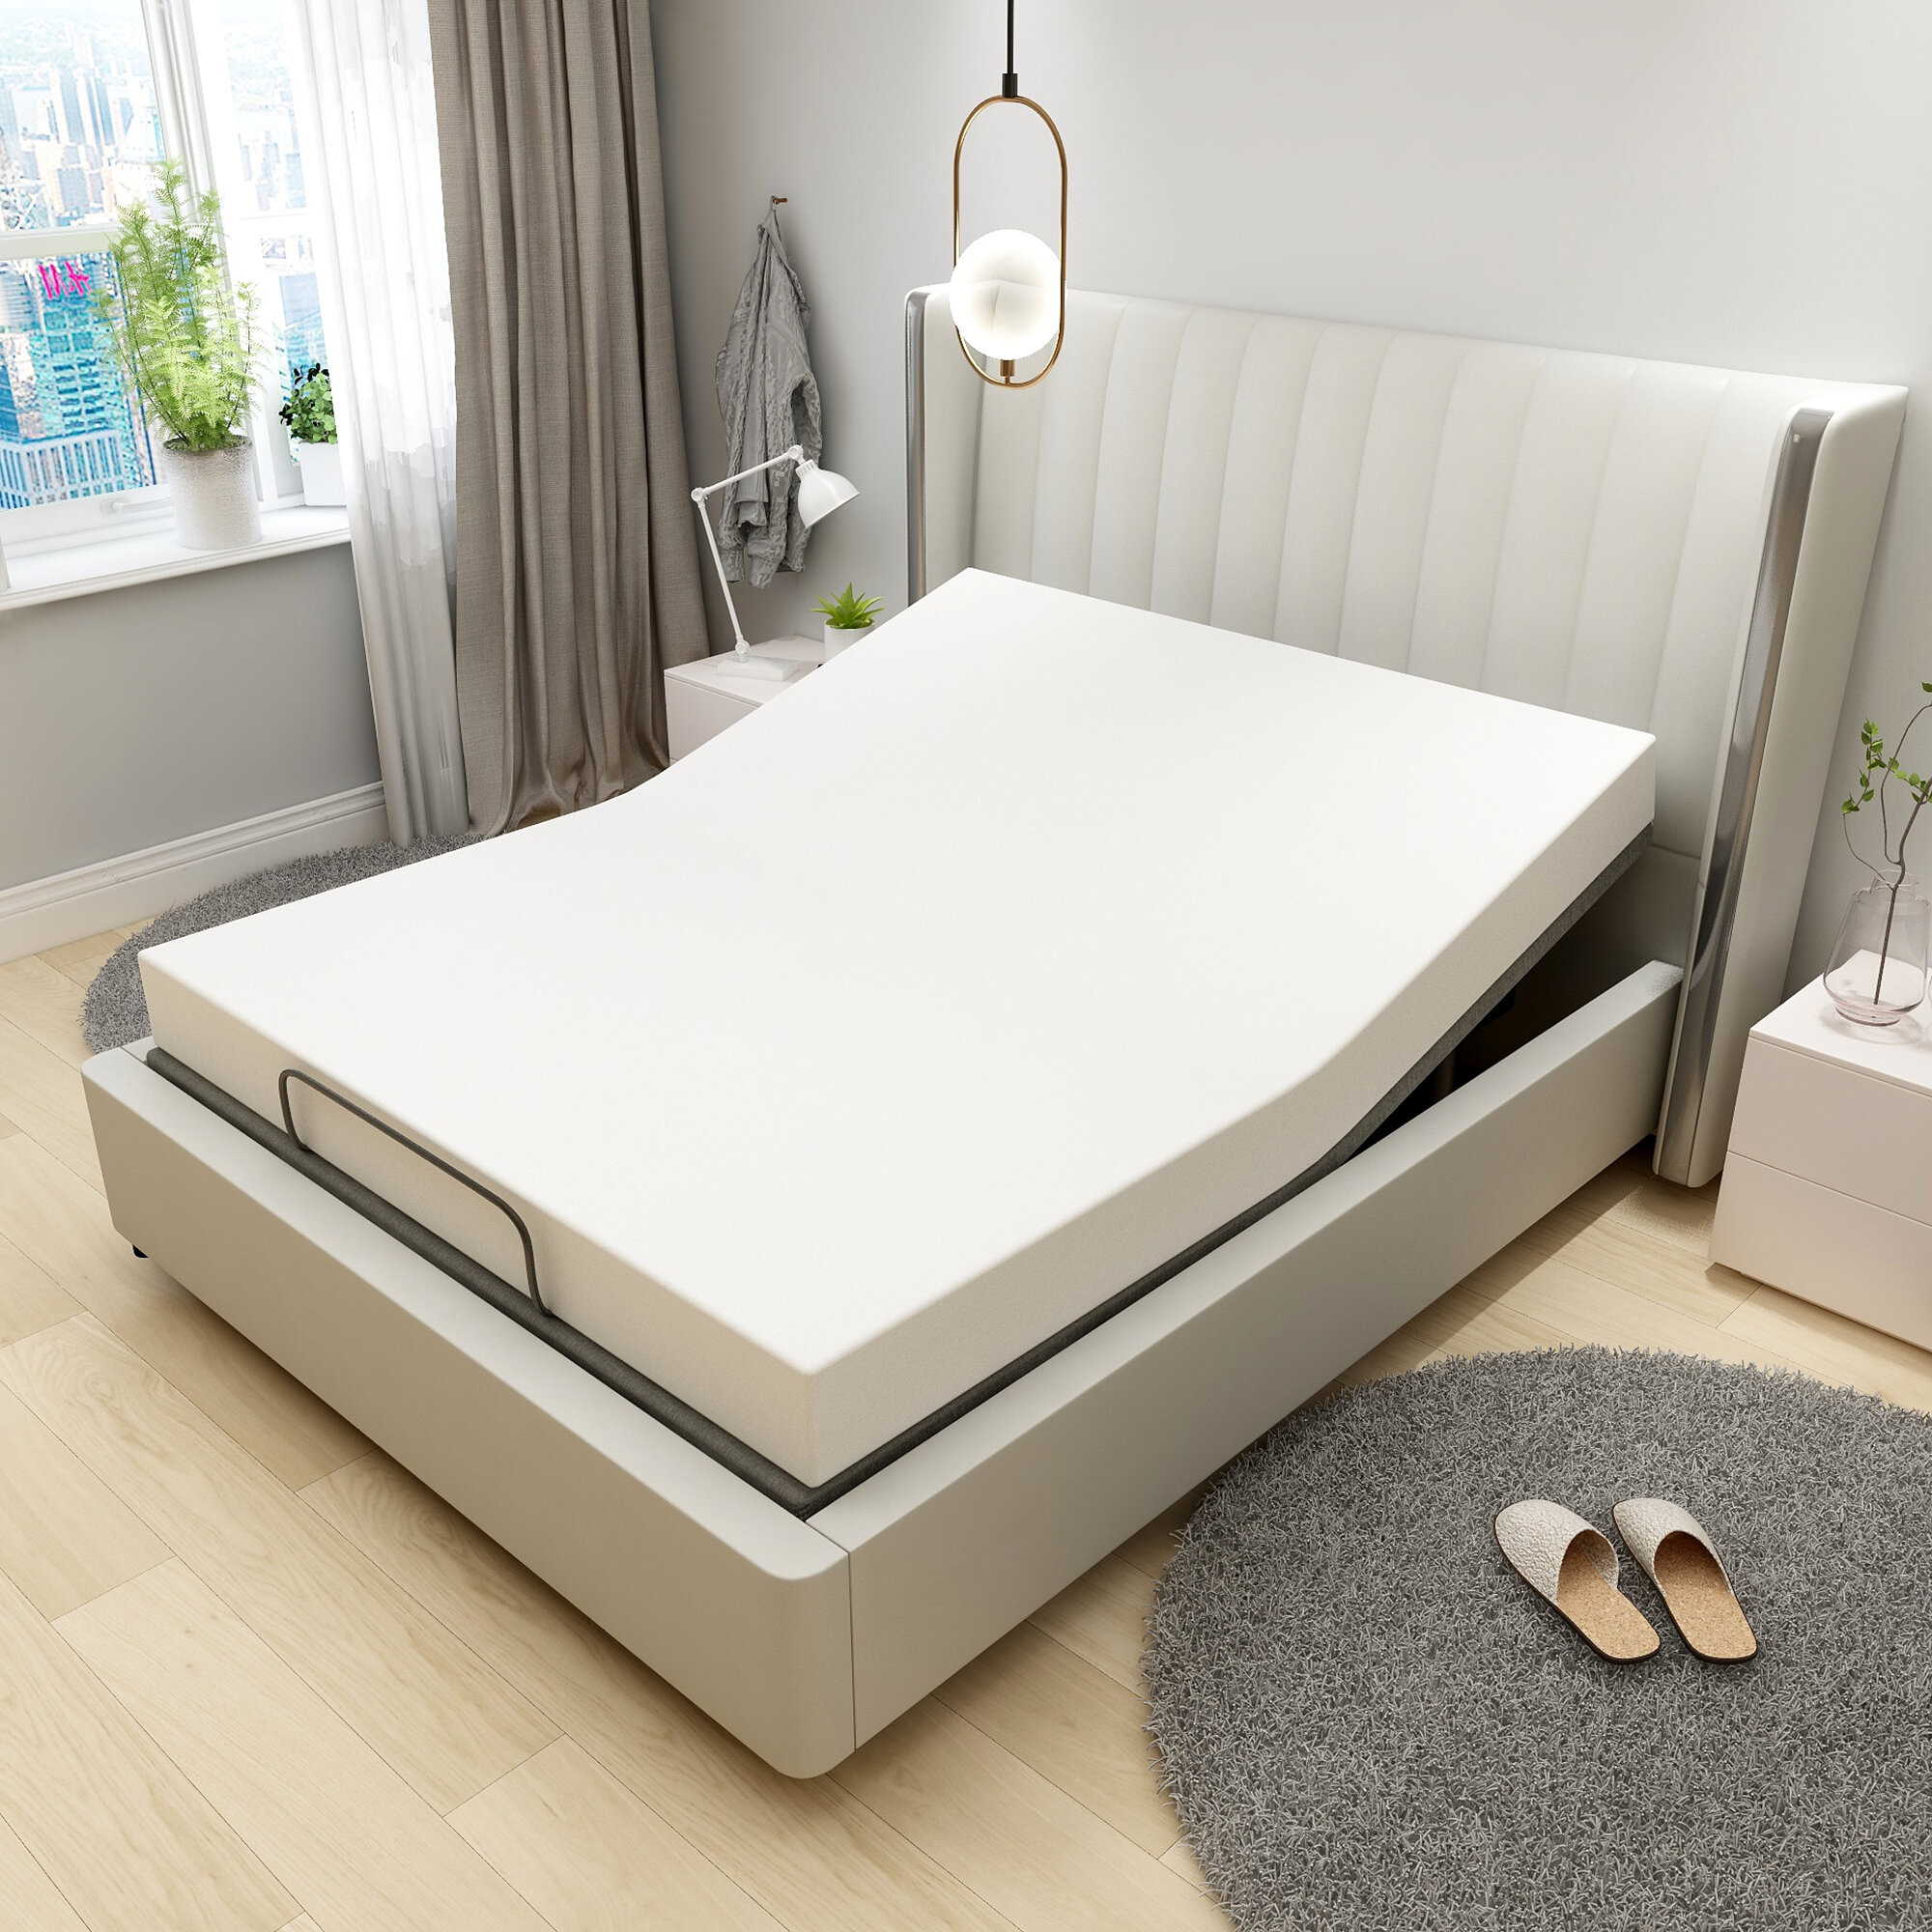 Bloxom Zero Gravity Adjustable Bed With Wireless Remote 